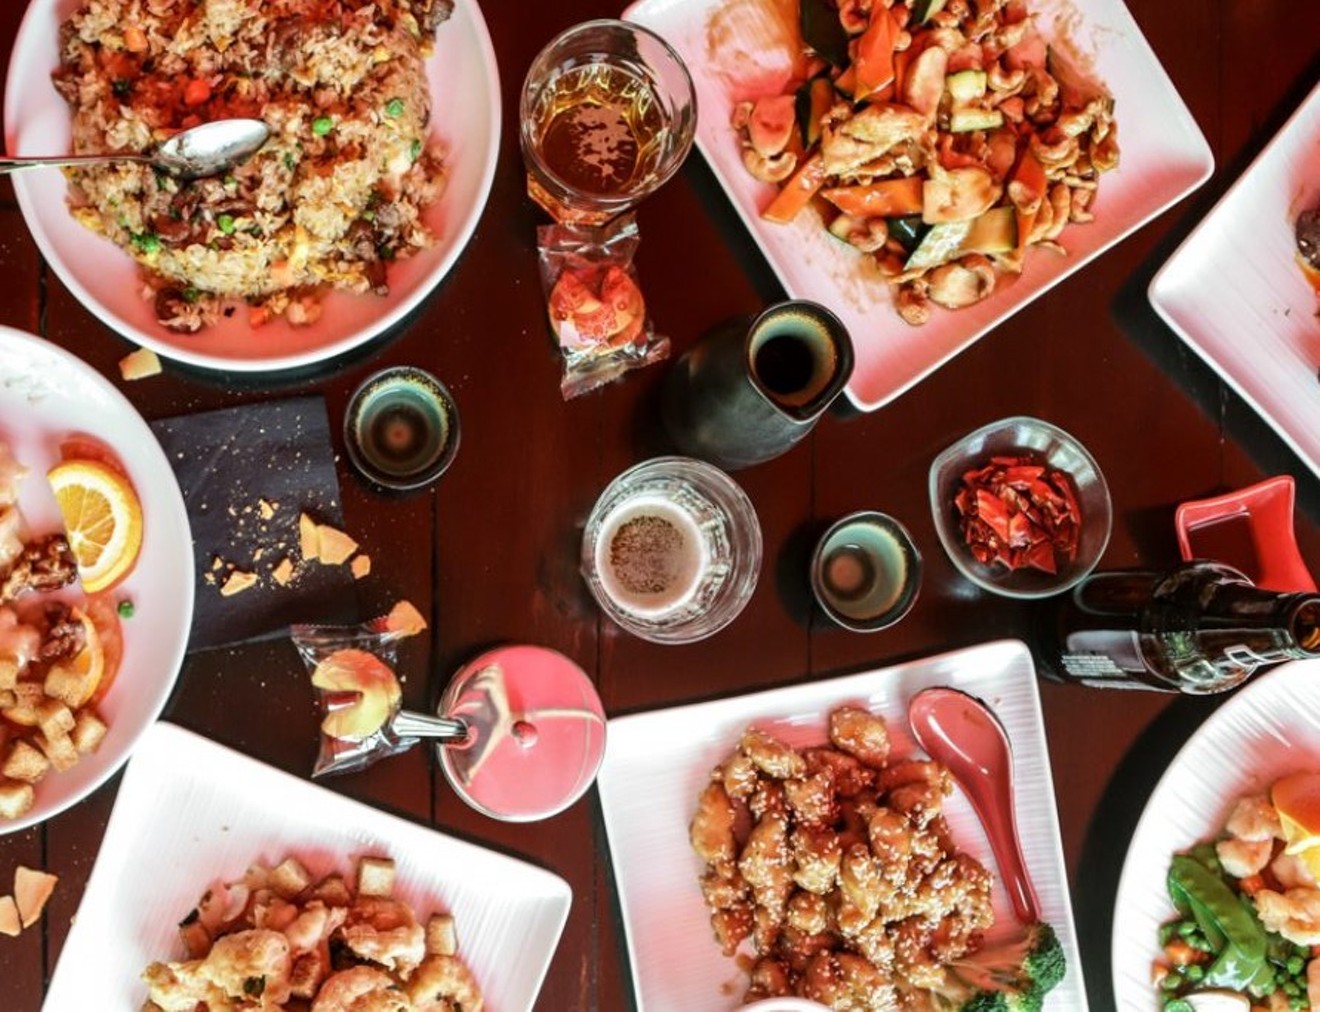 A spread of fried rice and other dishes from Trinity Groves' newest restaurant.